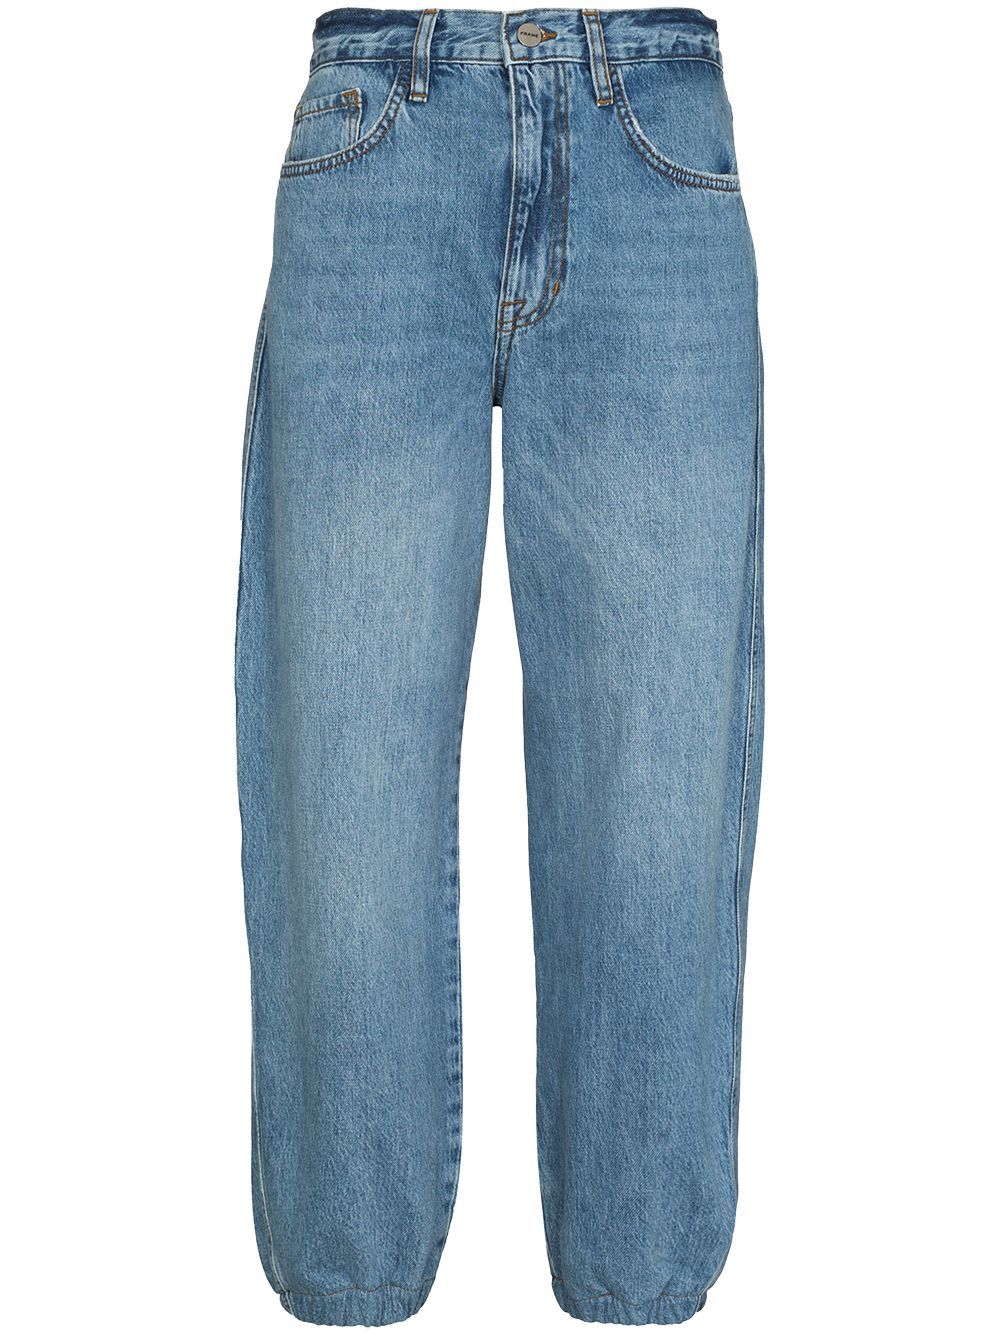 The Lounge Cropped Jeans